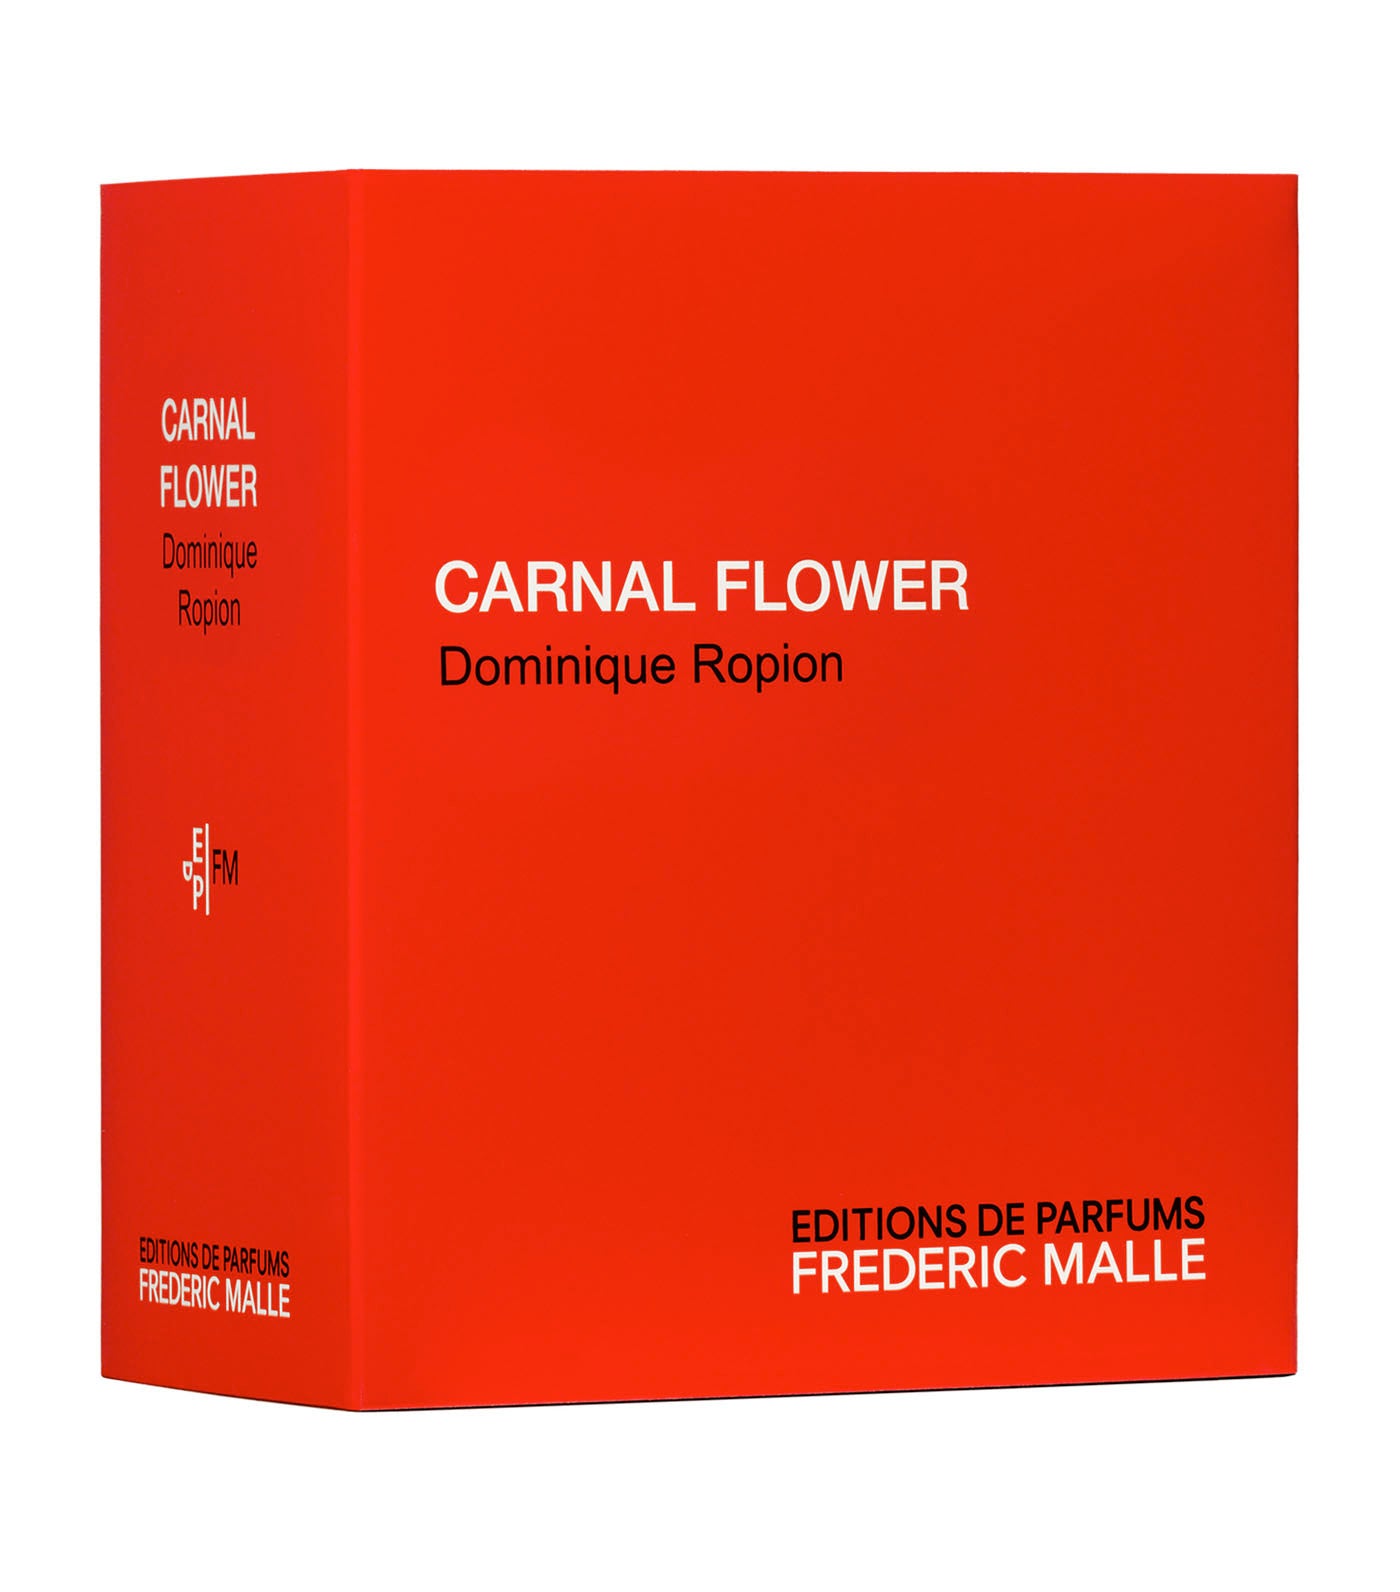 Carnal Flower Perfume by Dominique Ropion